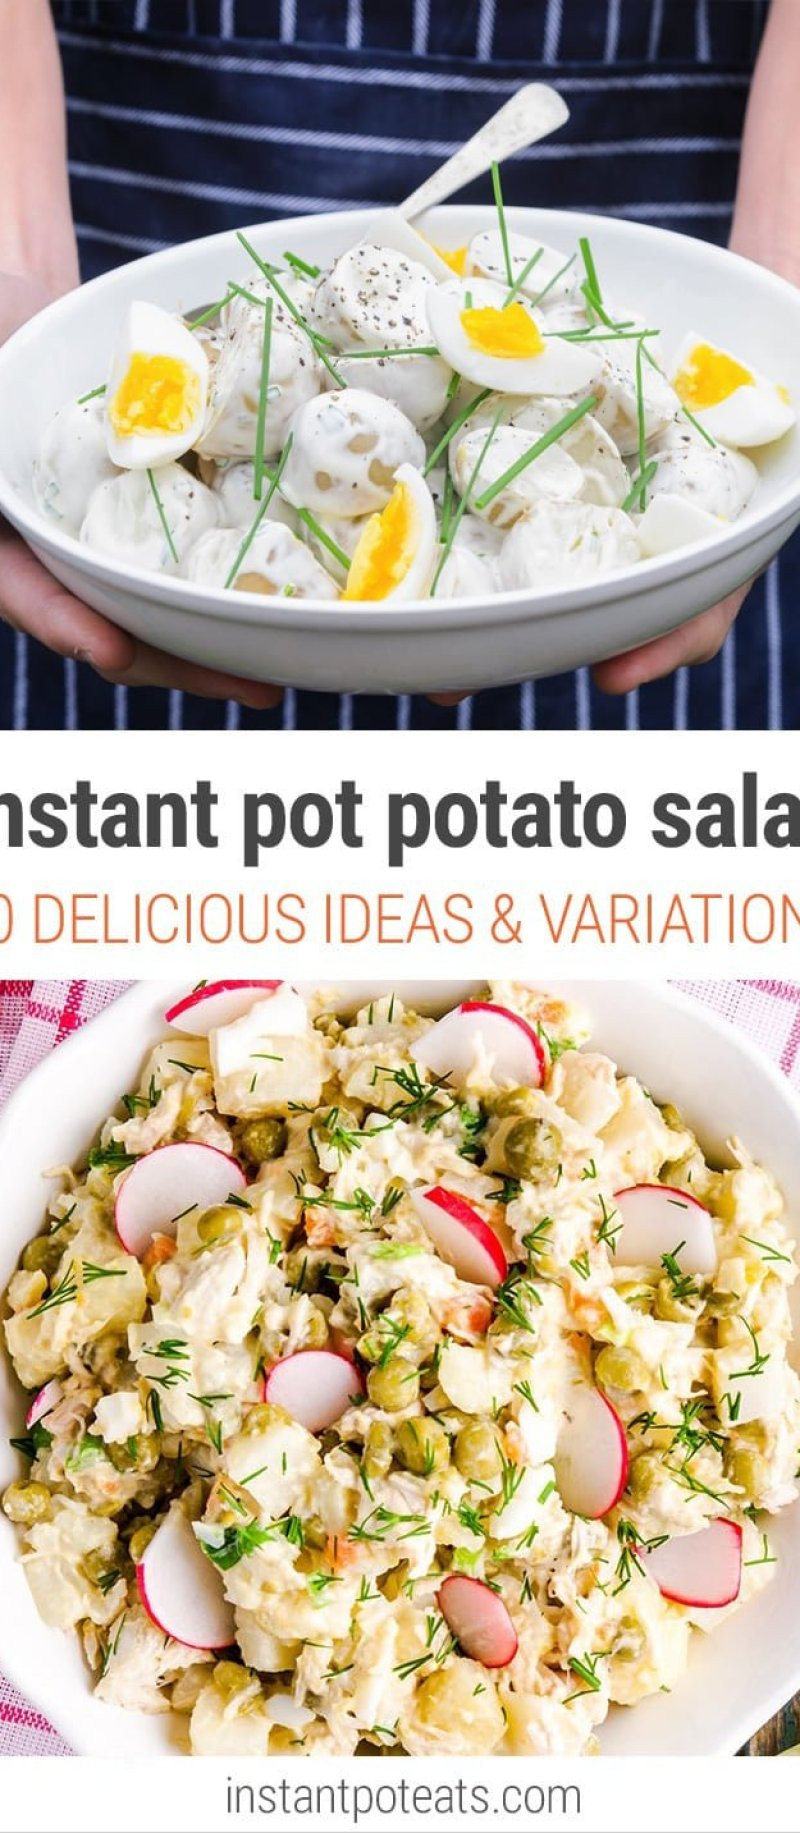 Potato Salad Instant Pot
 Instant Pot Potato Salad With 10 Delicious Ideas